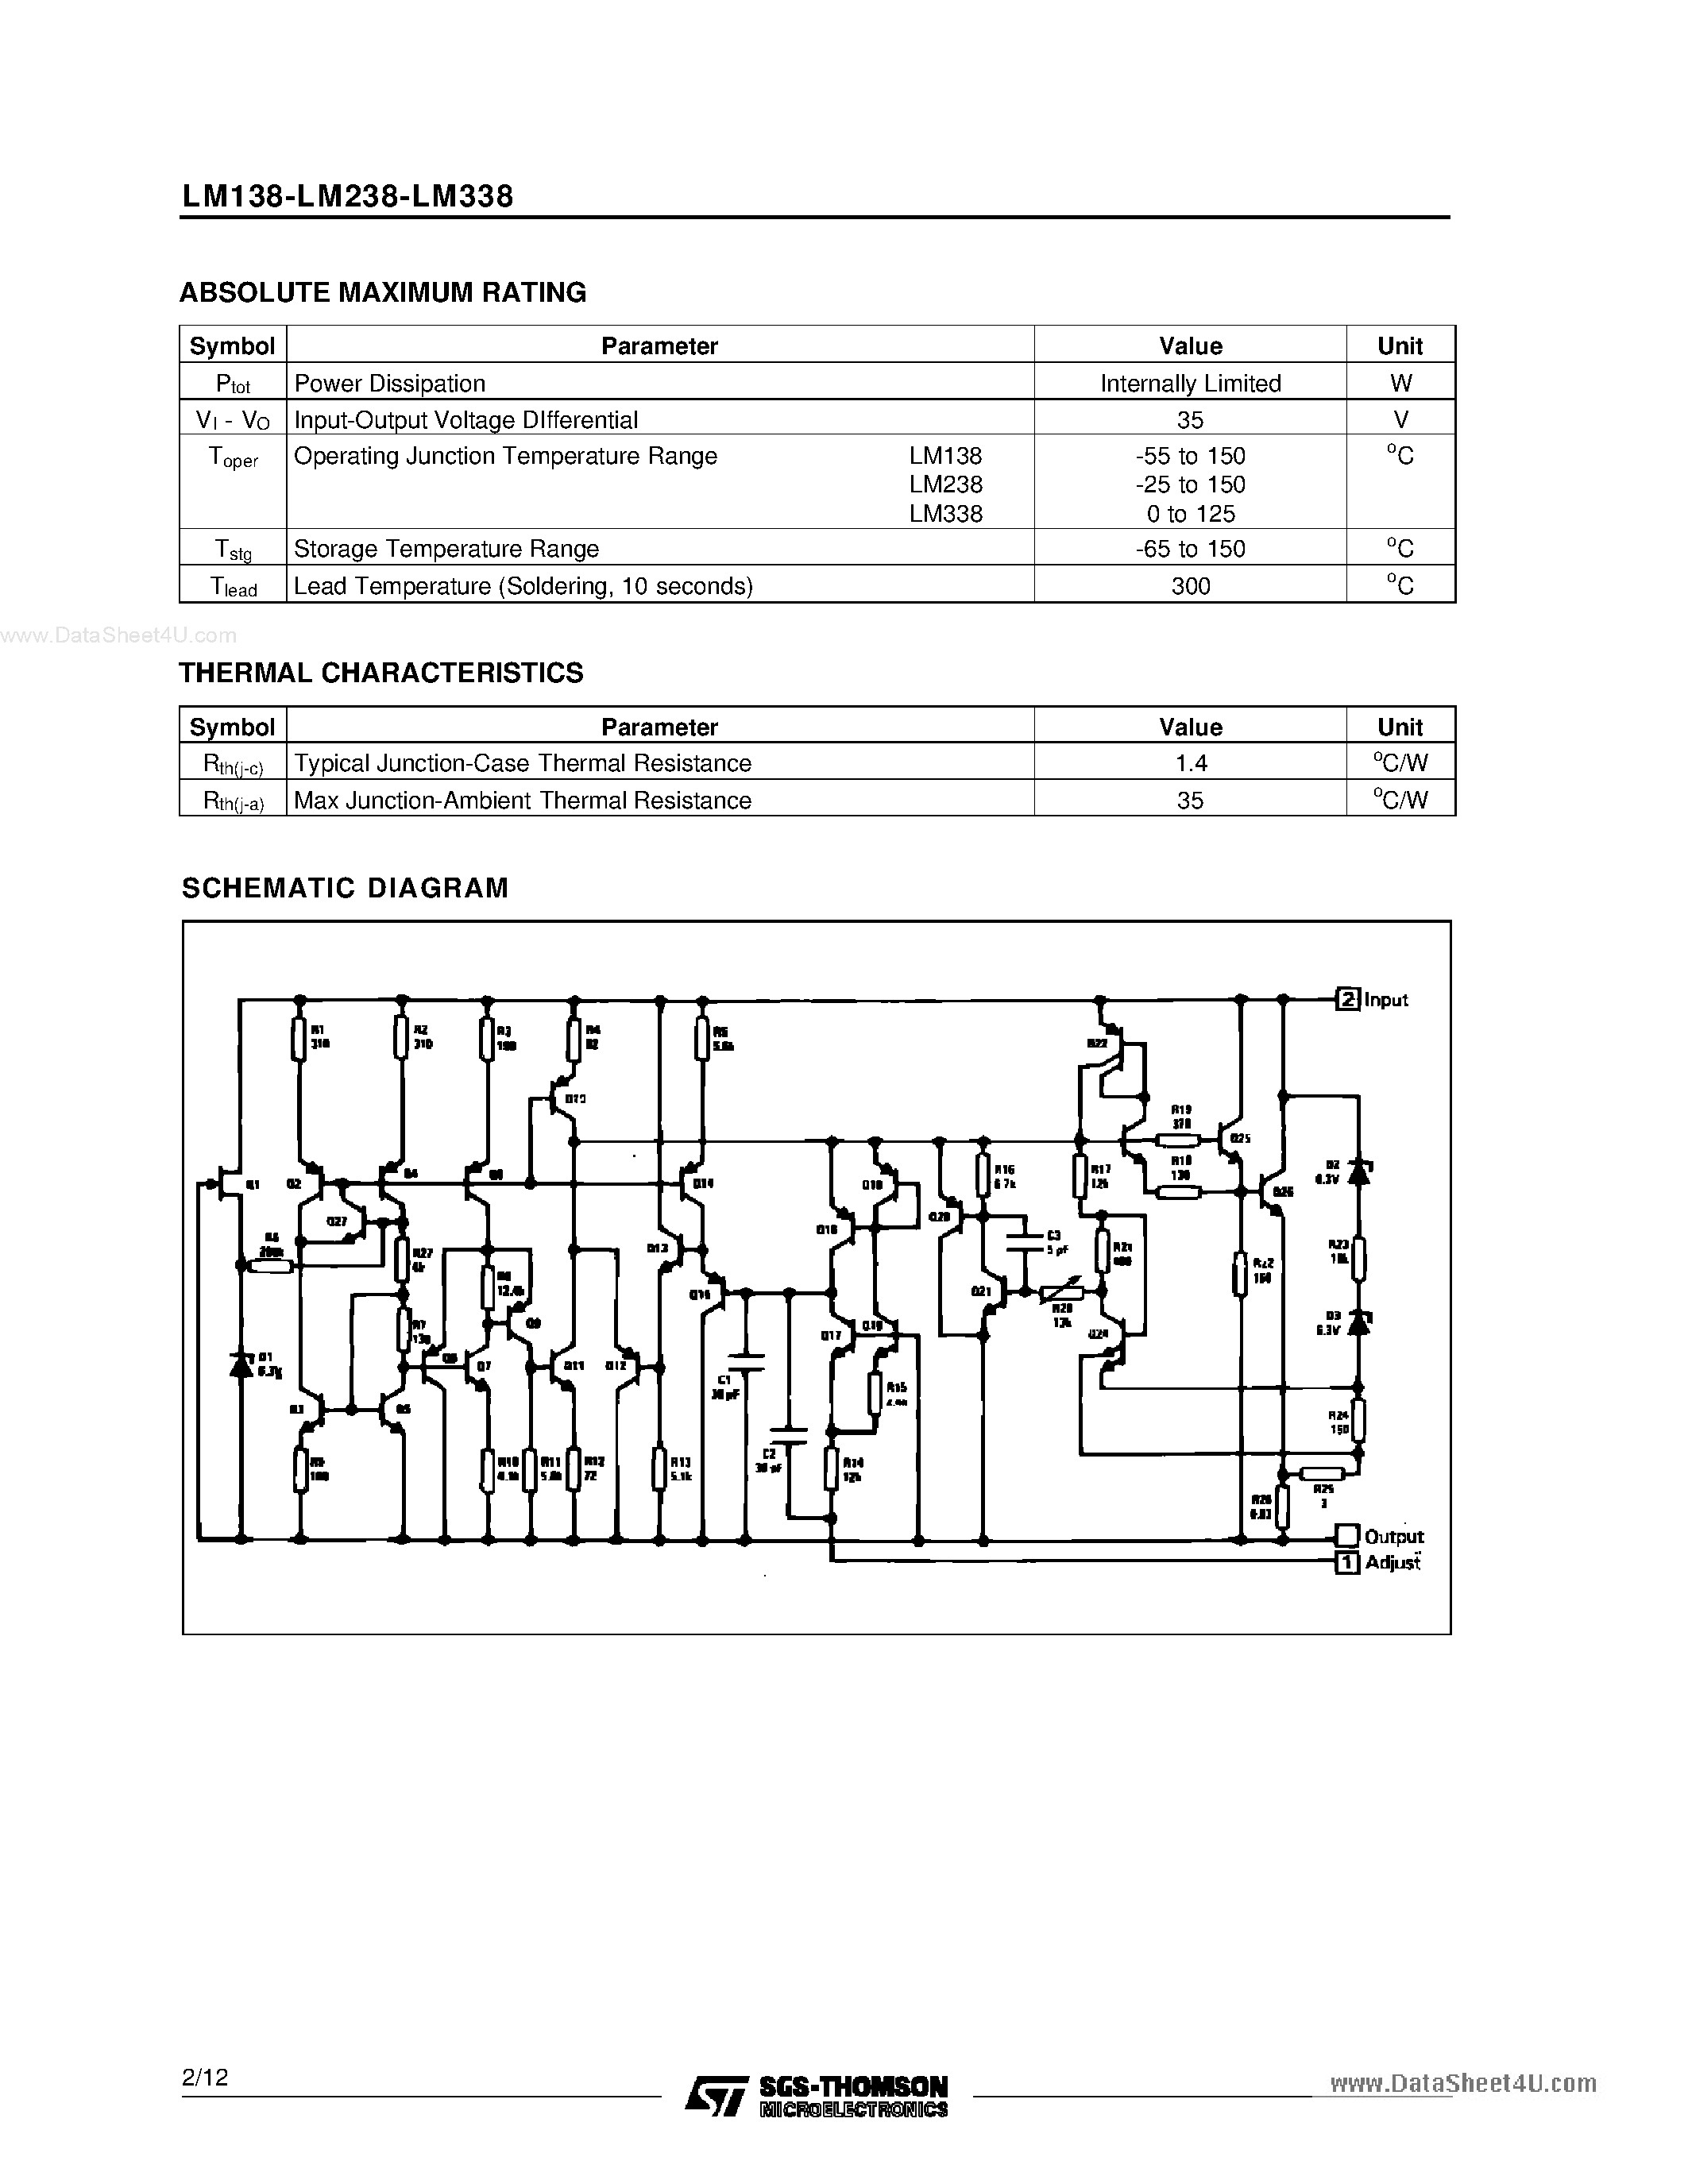 Datasheet LM-338K - Search ---> LM338K page 2